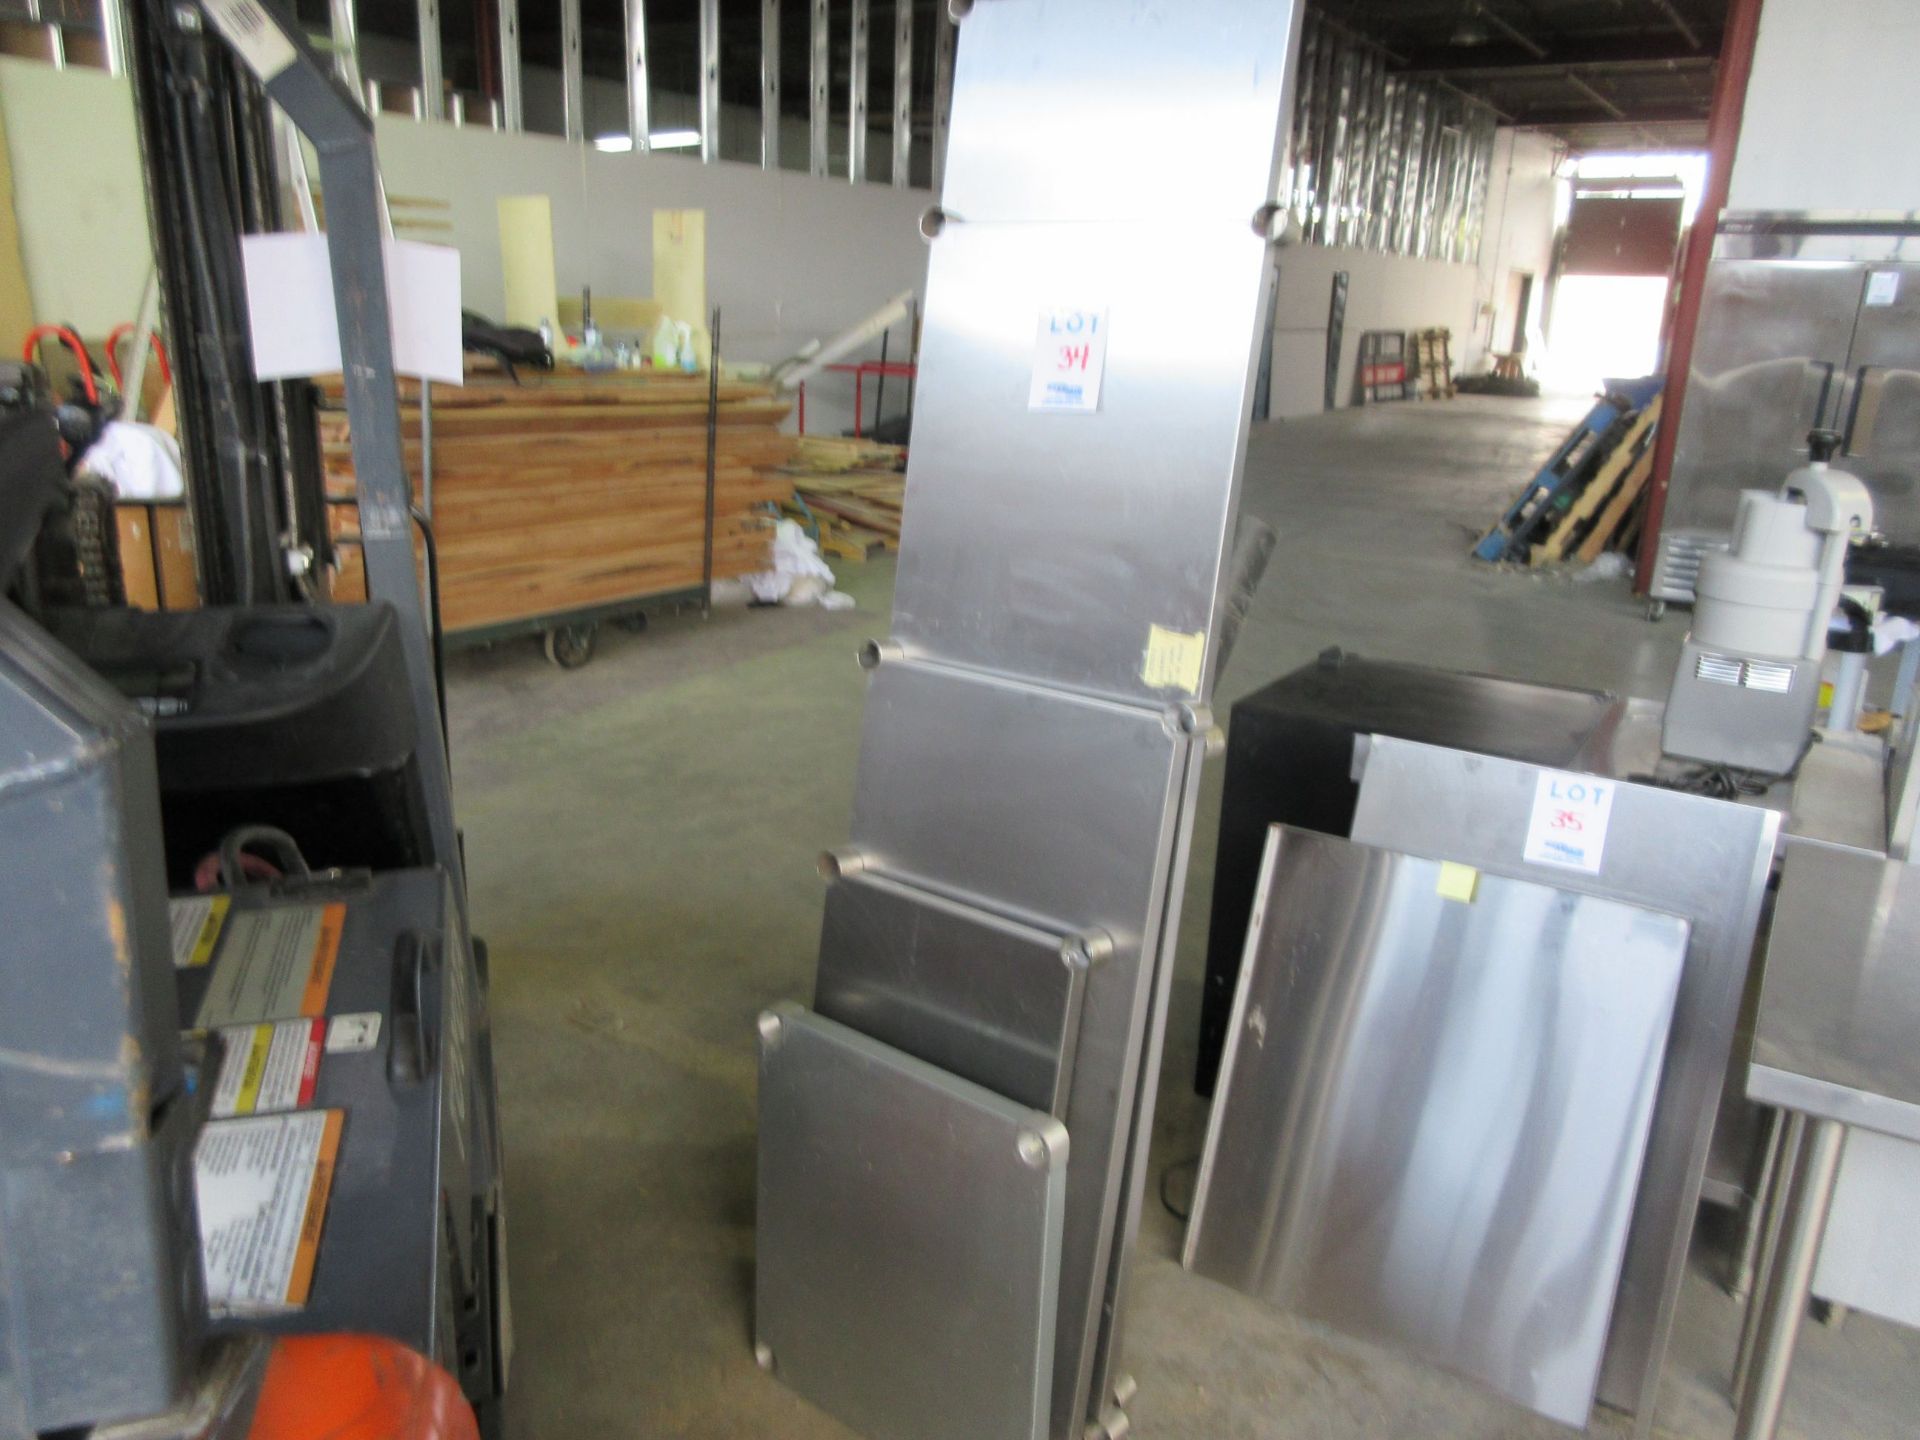 LOT Including S/S Storage Shelves in assorted sizes. Approx. (79”, 67”, 43”, 31”, 24”)